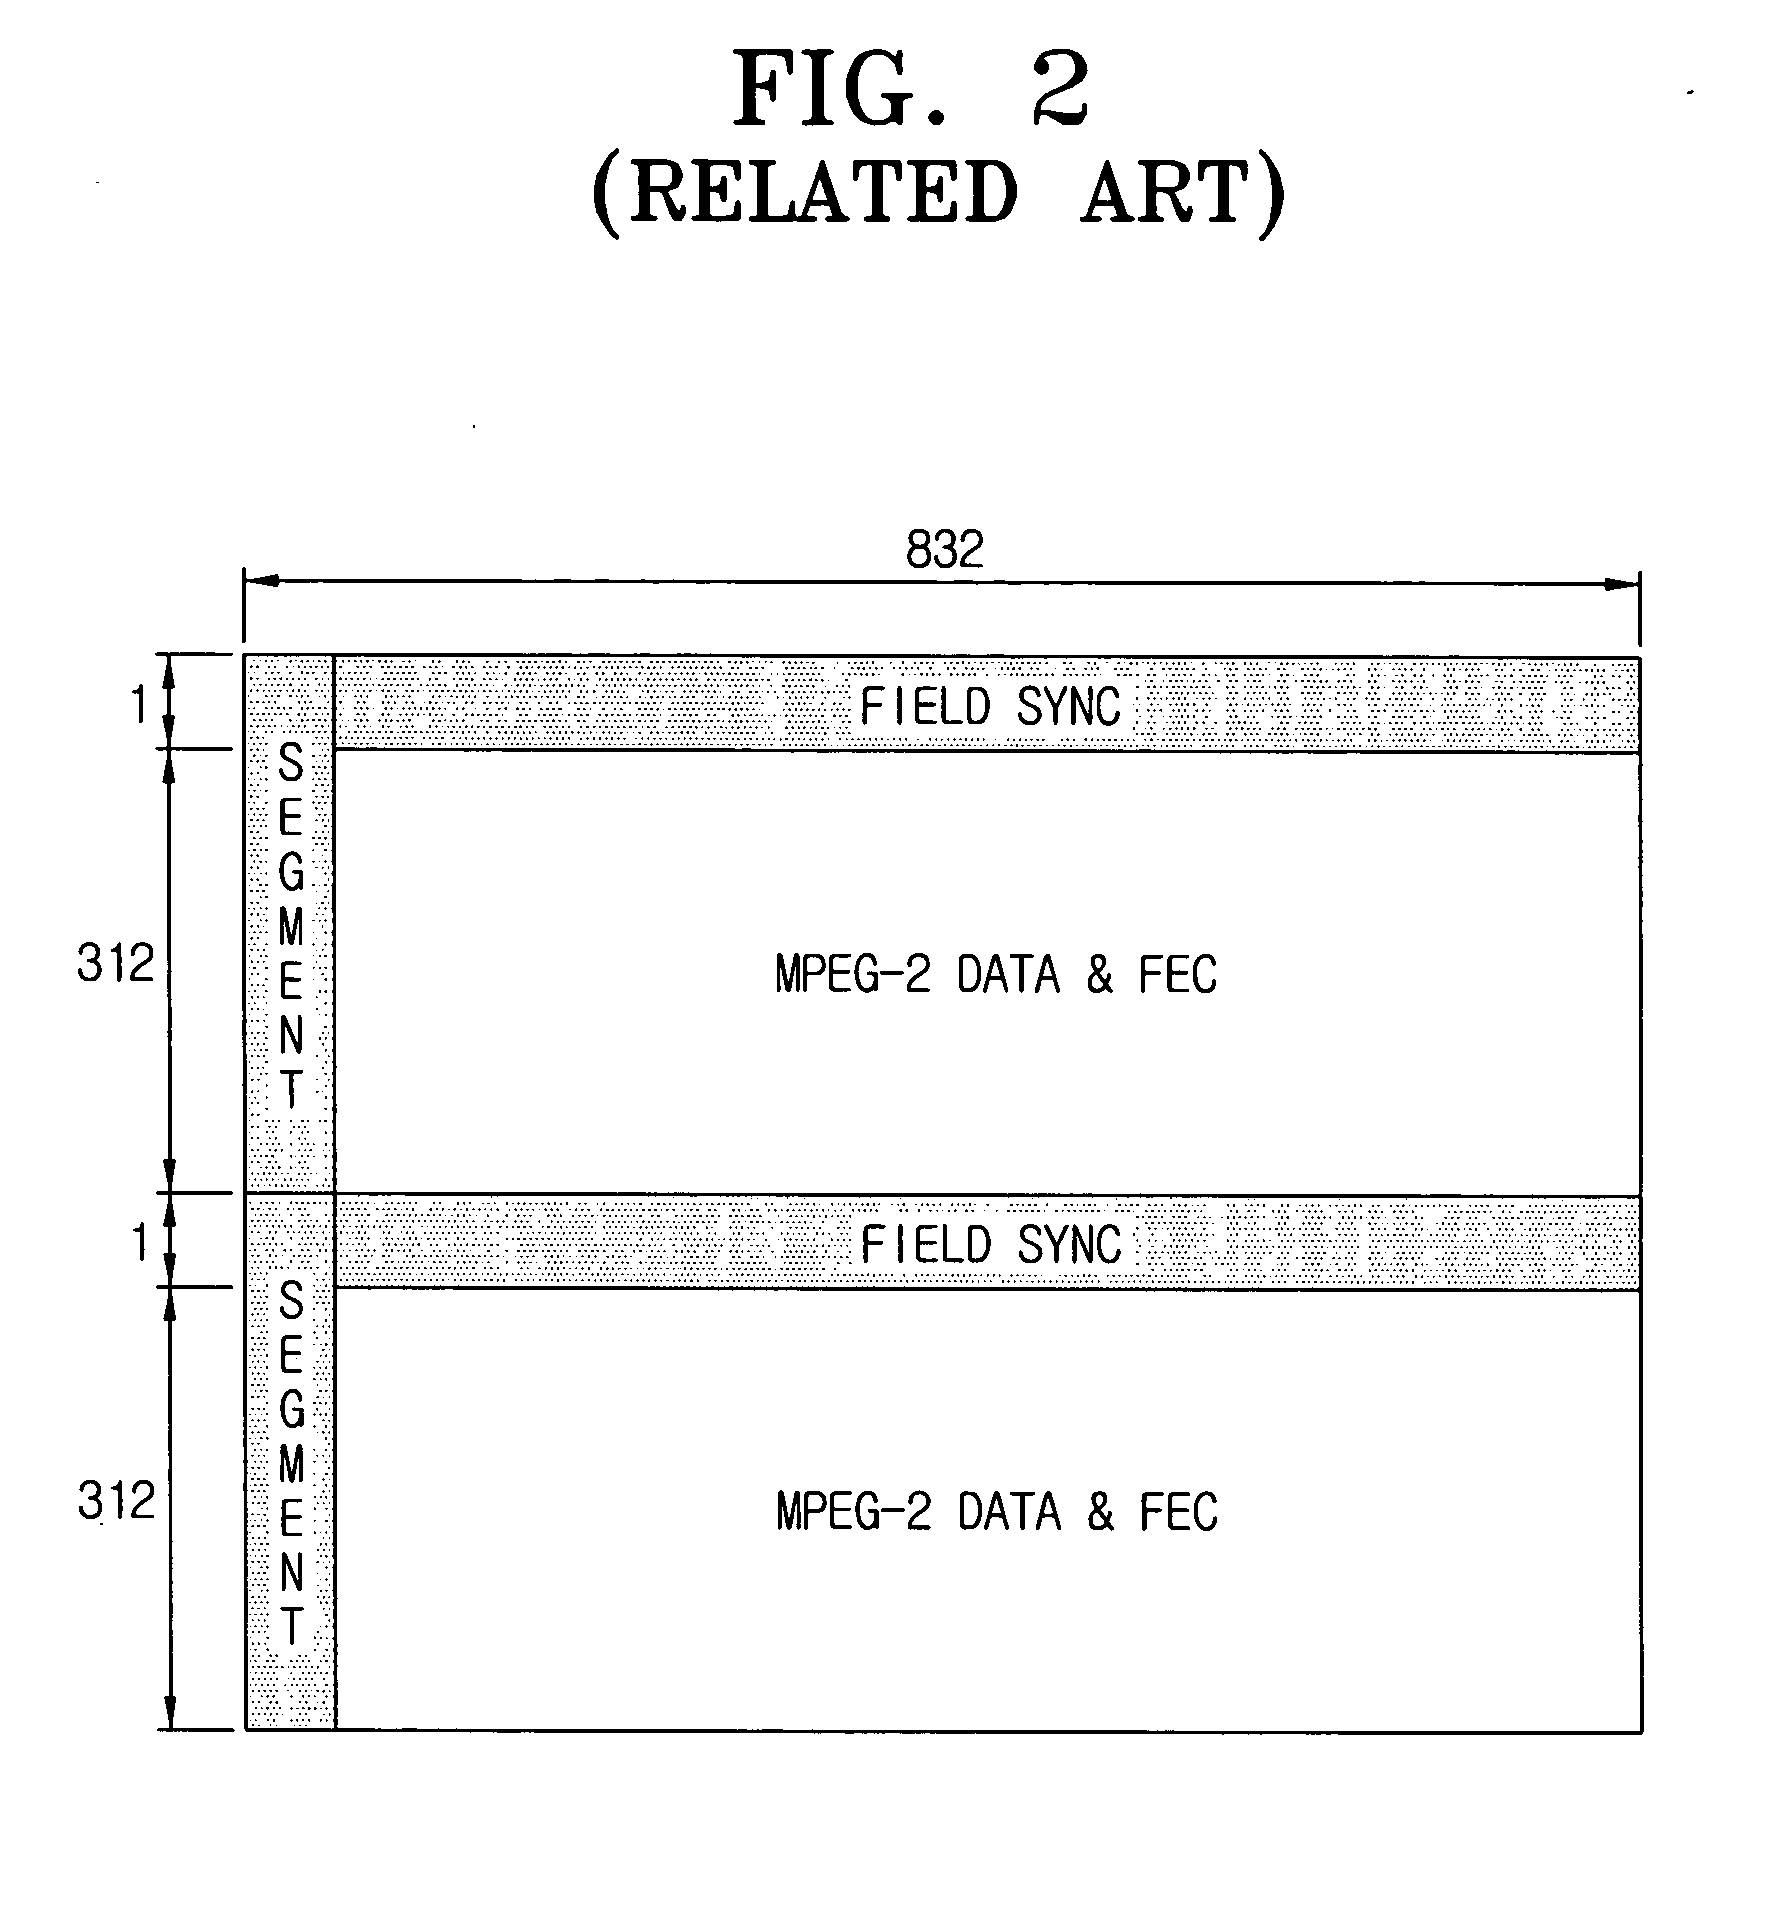 Turbo stream processing device and method